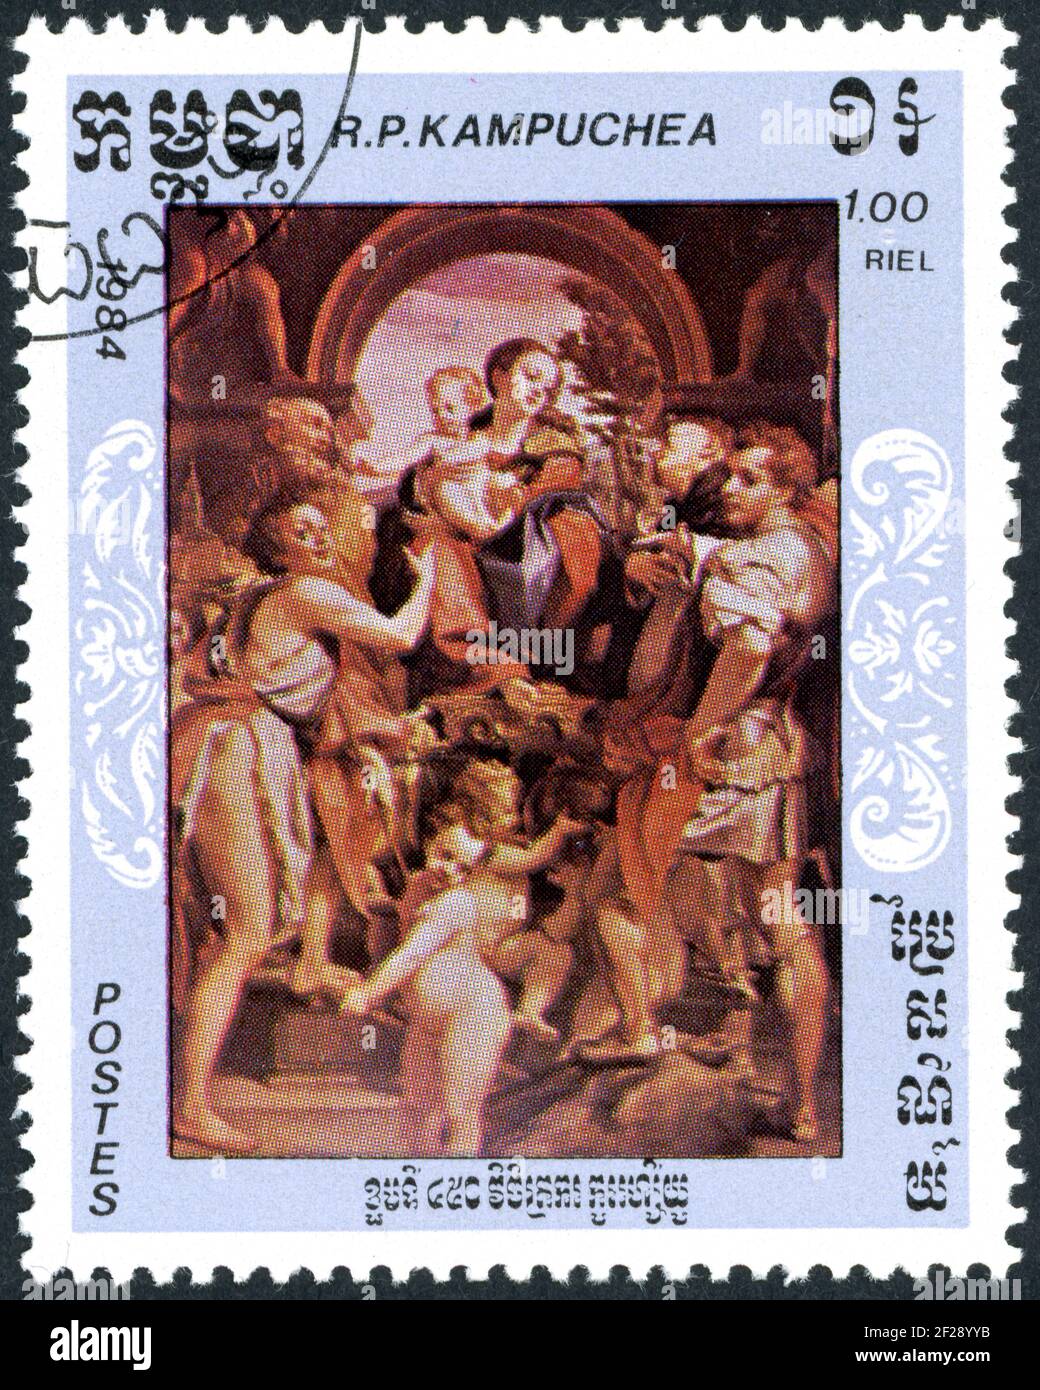 A stamp printed in Kampuchea, shown the painting: Madonna&Child with St. John the Baptist, Geminian - Peter Martyr and George, by Antonio da Correggio Stock Photo